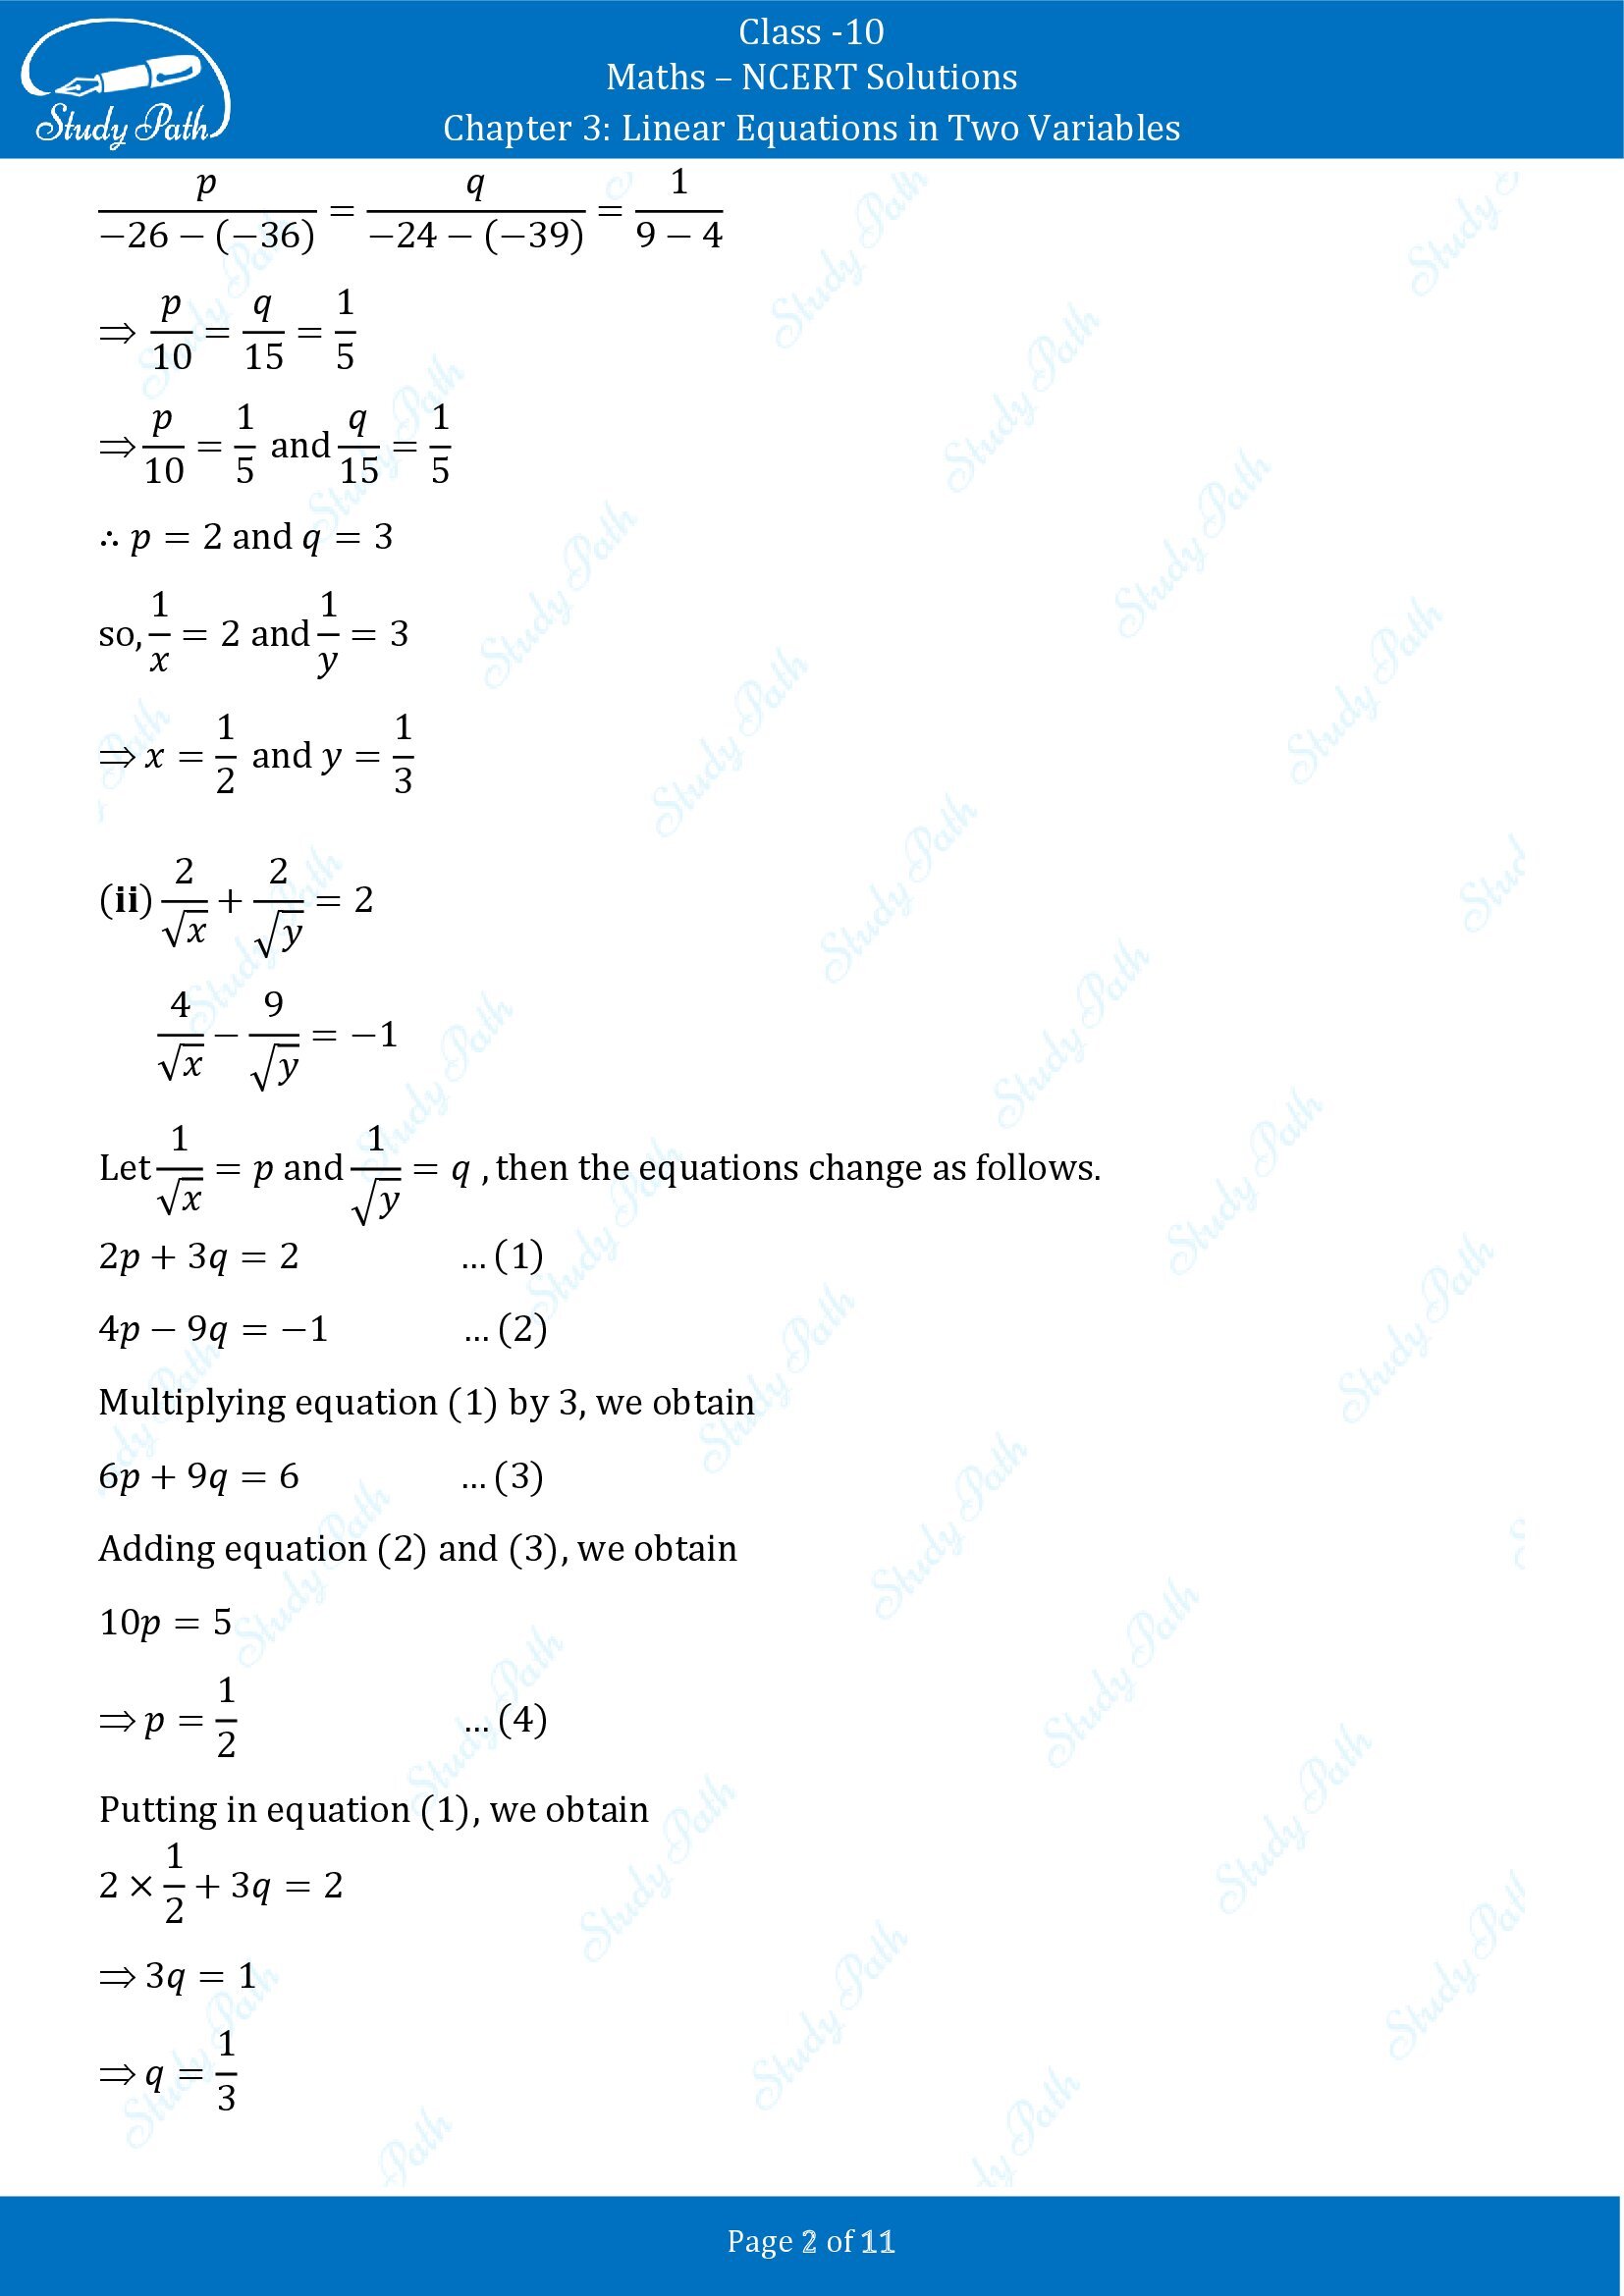 NCERT Solutions for Class 10 Maths Chapter 3 Linear Equations in Two Variables Exercise 3.6 00002